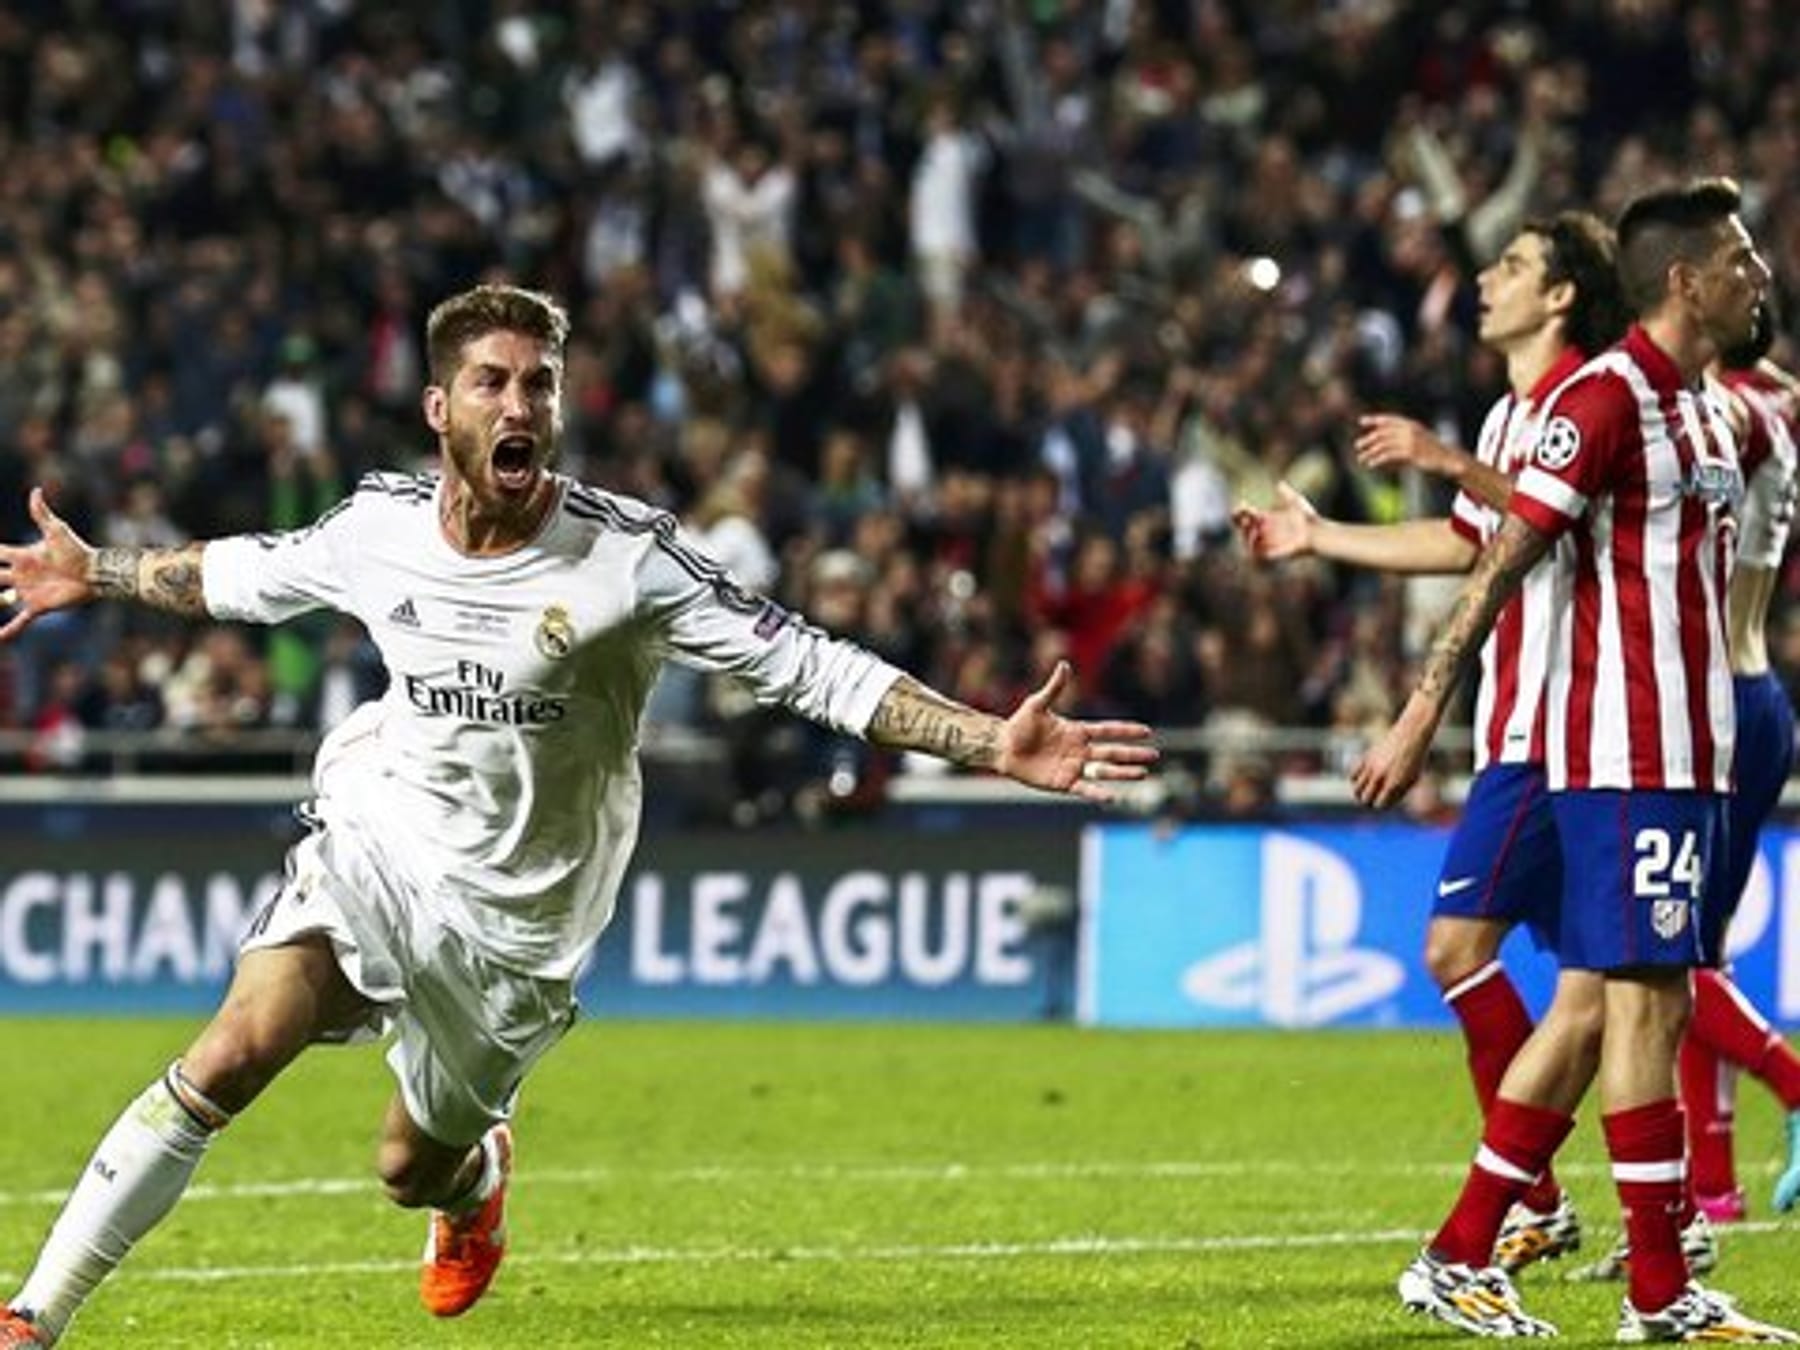 Champions-League-Finale Live-Stream Real - Atletico live sehen